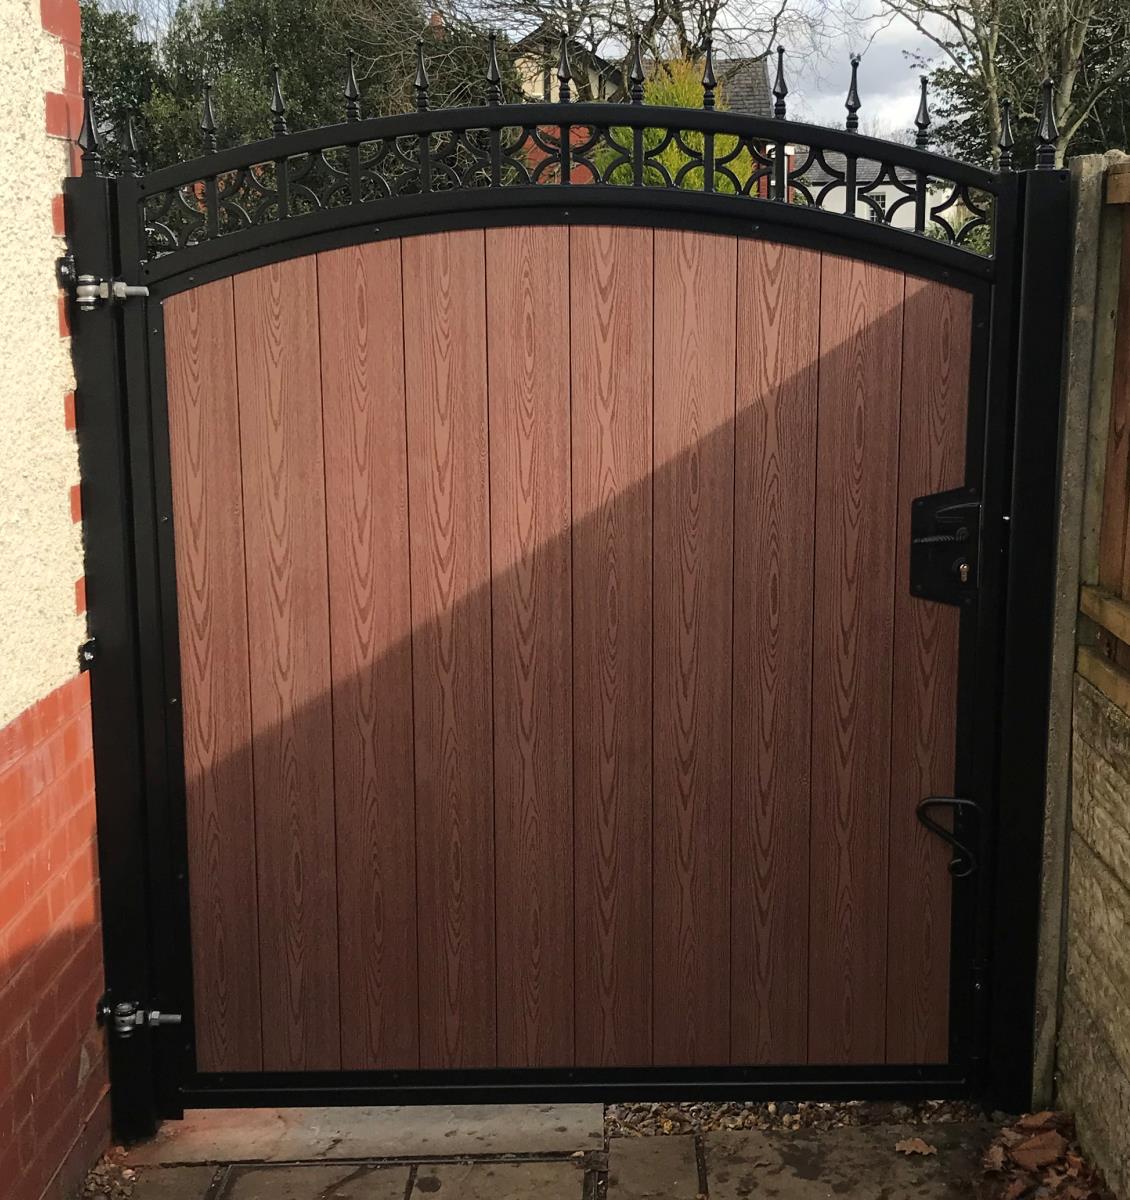 Ornate steel framed timber effect composite gate installation for a property in the Manchester area.